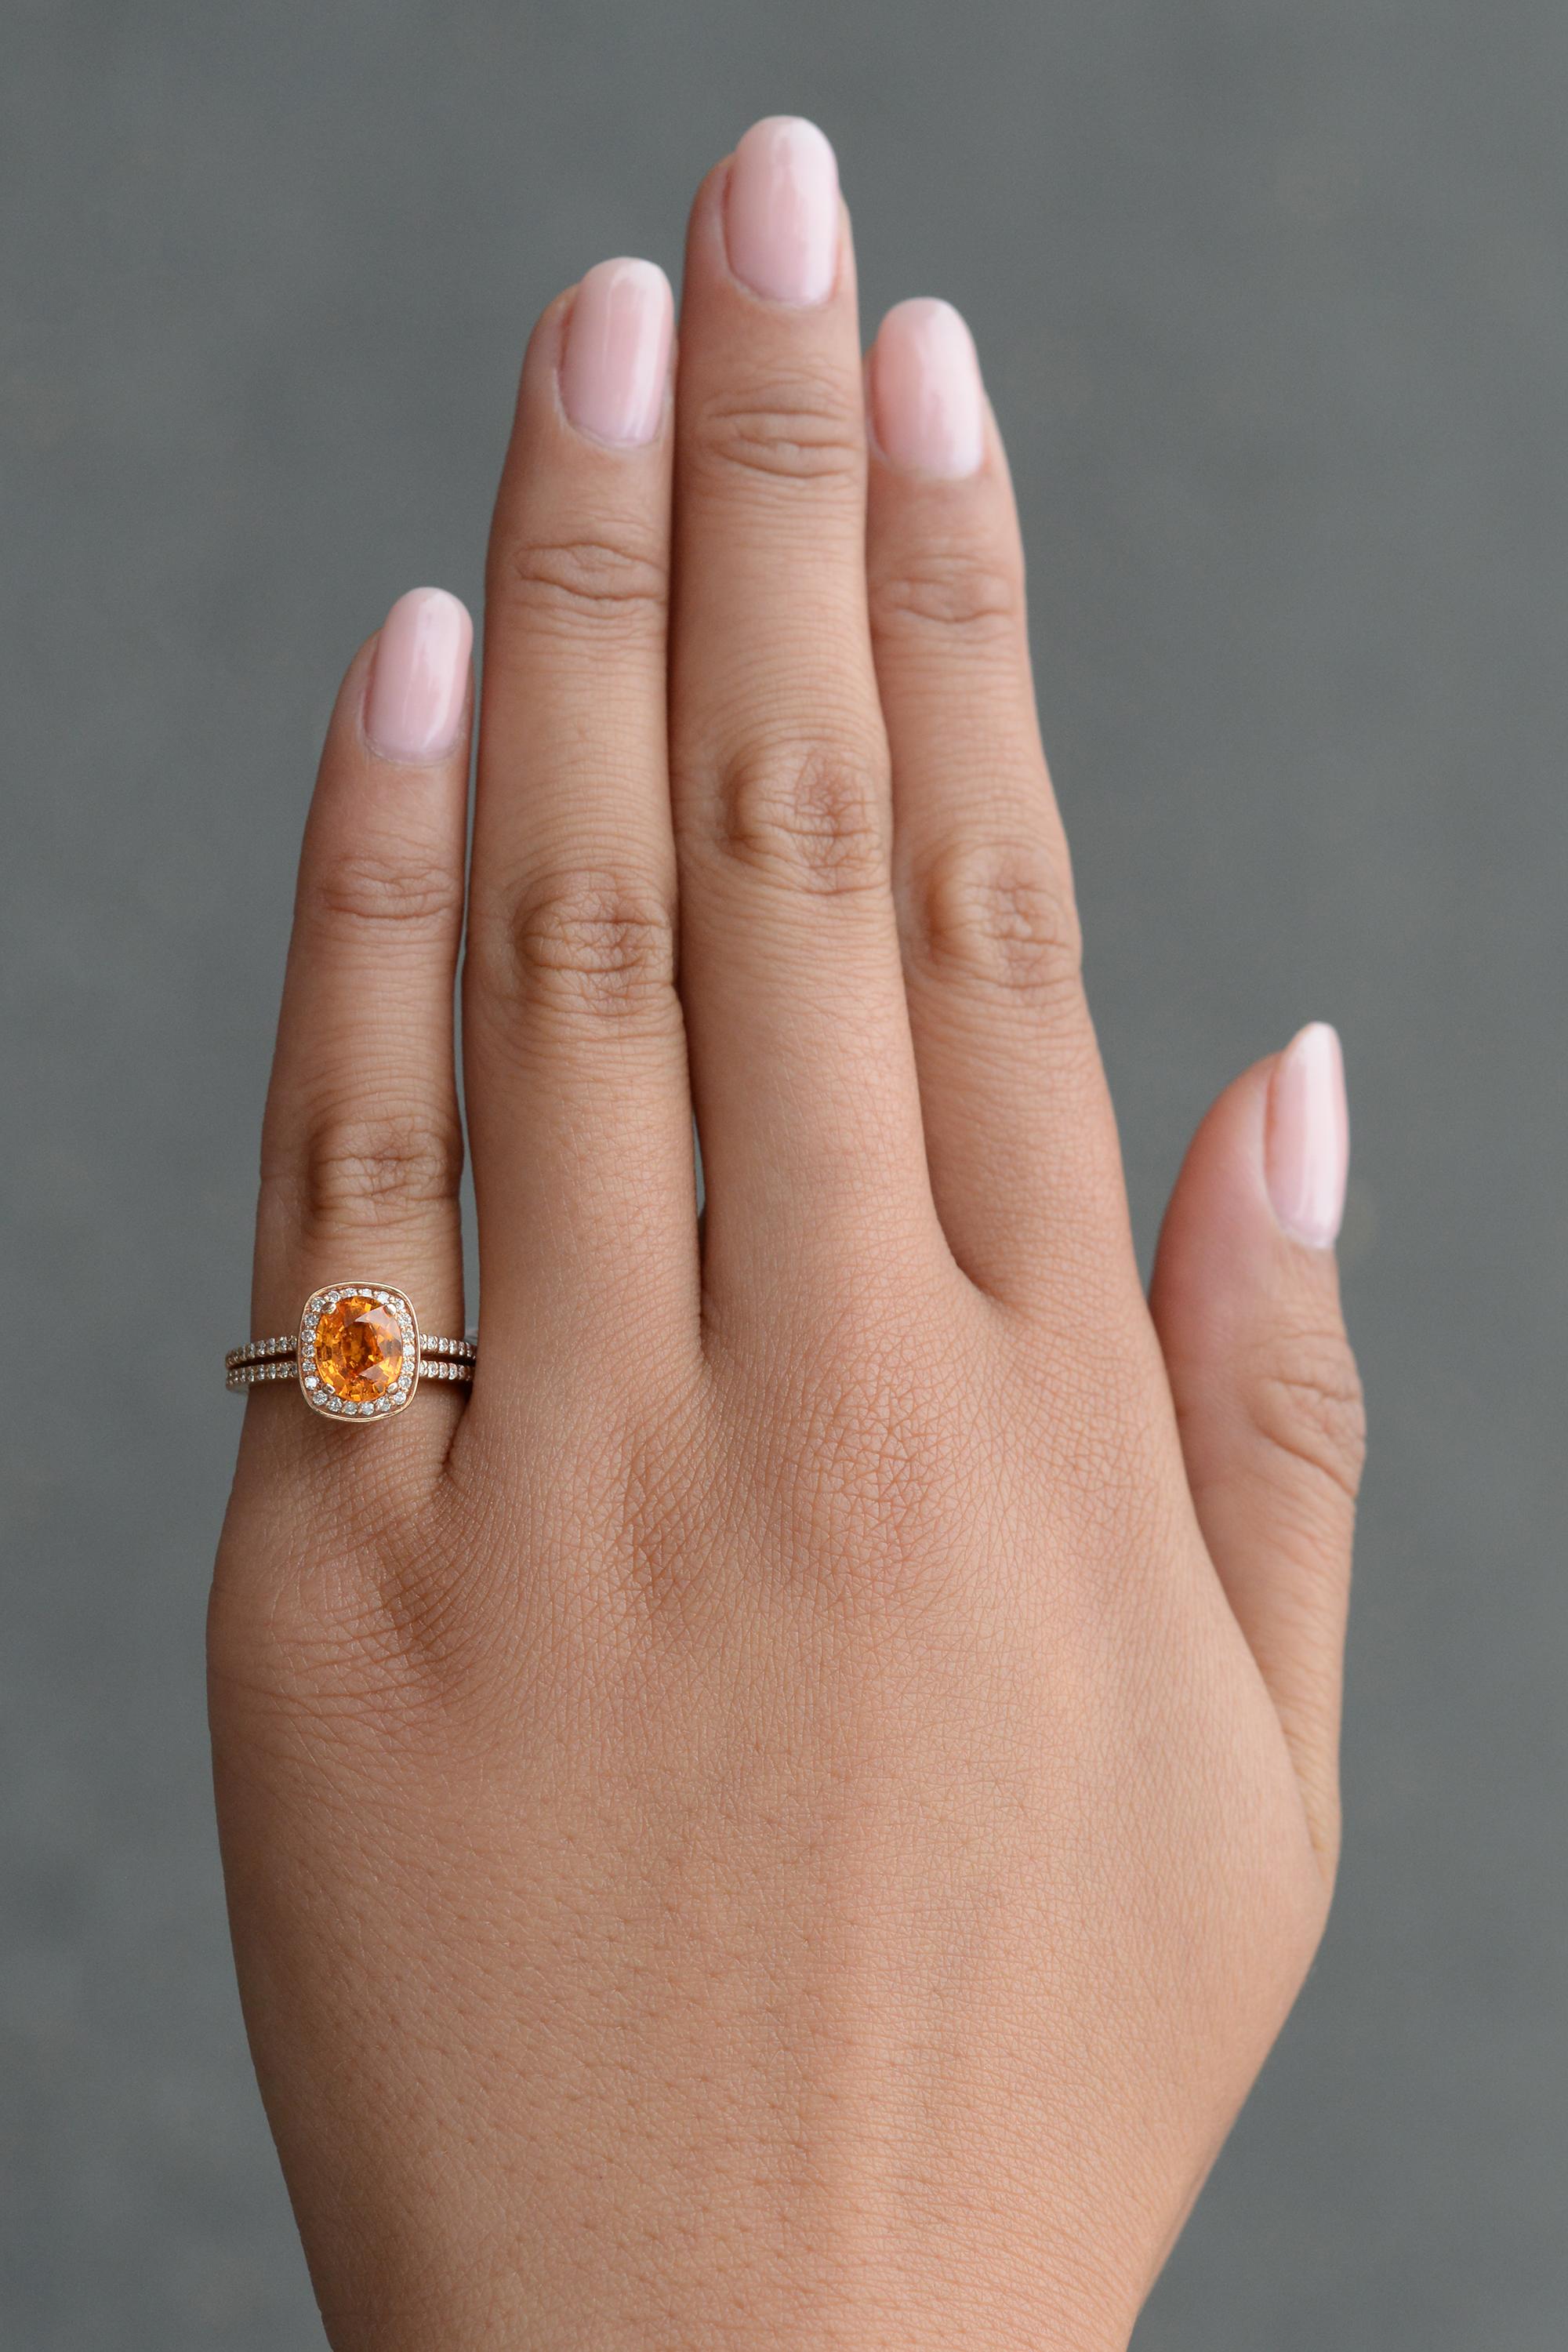 This glamorous gemstone engagement ring showcases a spectacular, seldom seen specimen. The spessartite garnet illuminates a vivid, glowing orange that is highly coveted. There is surely no lack of brilliance in this ring, featuring a halo of bright